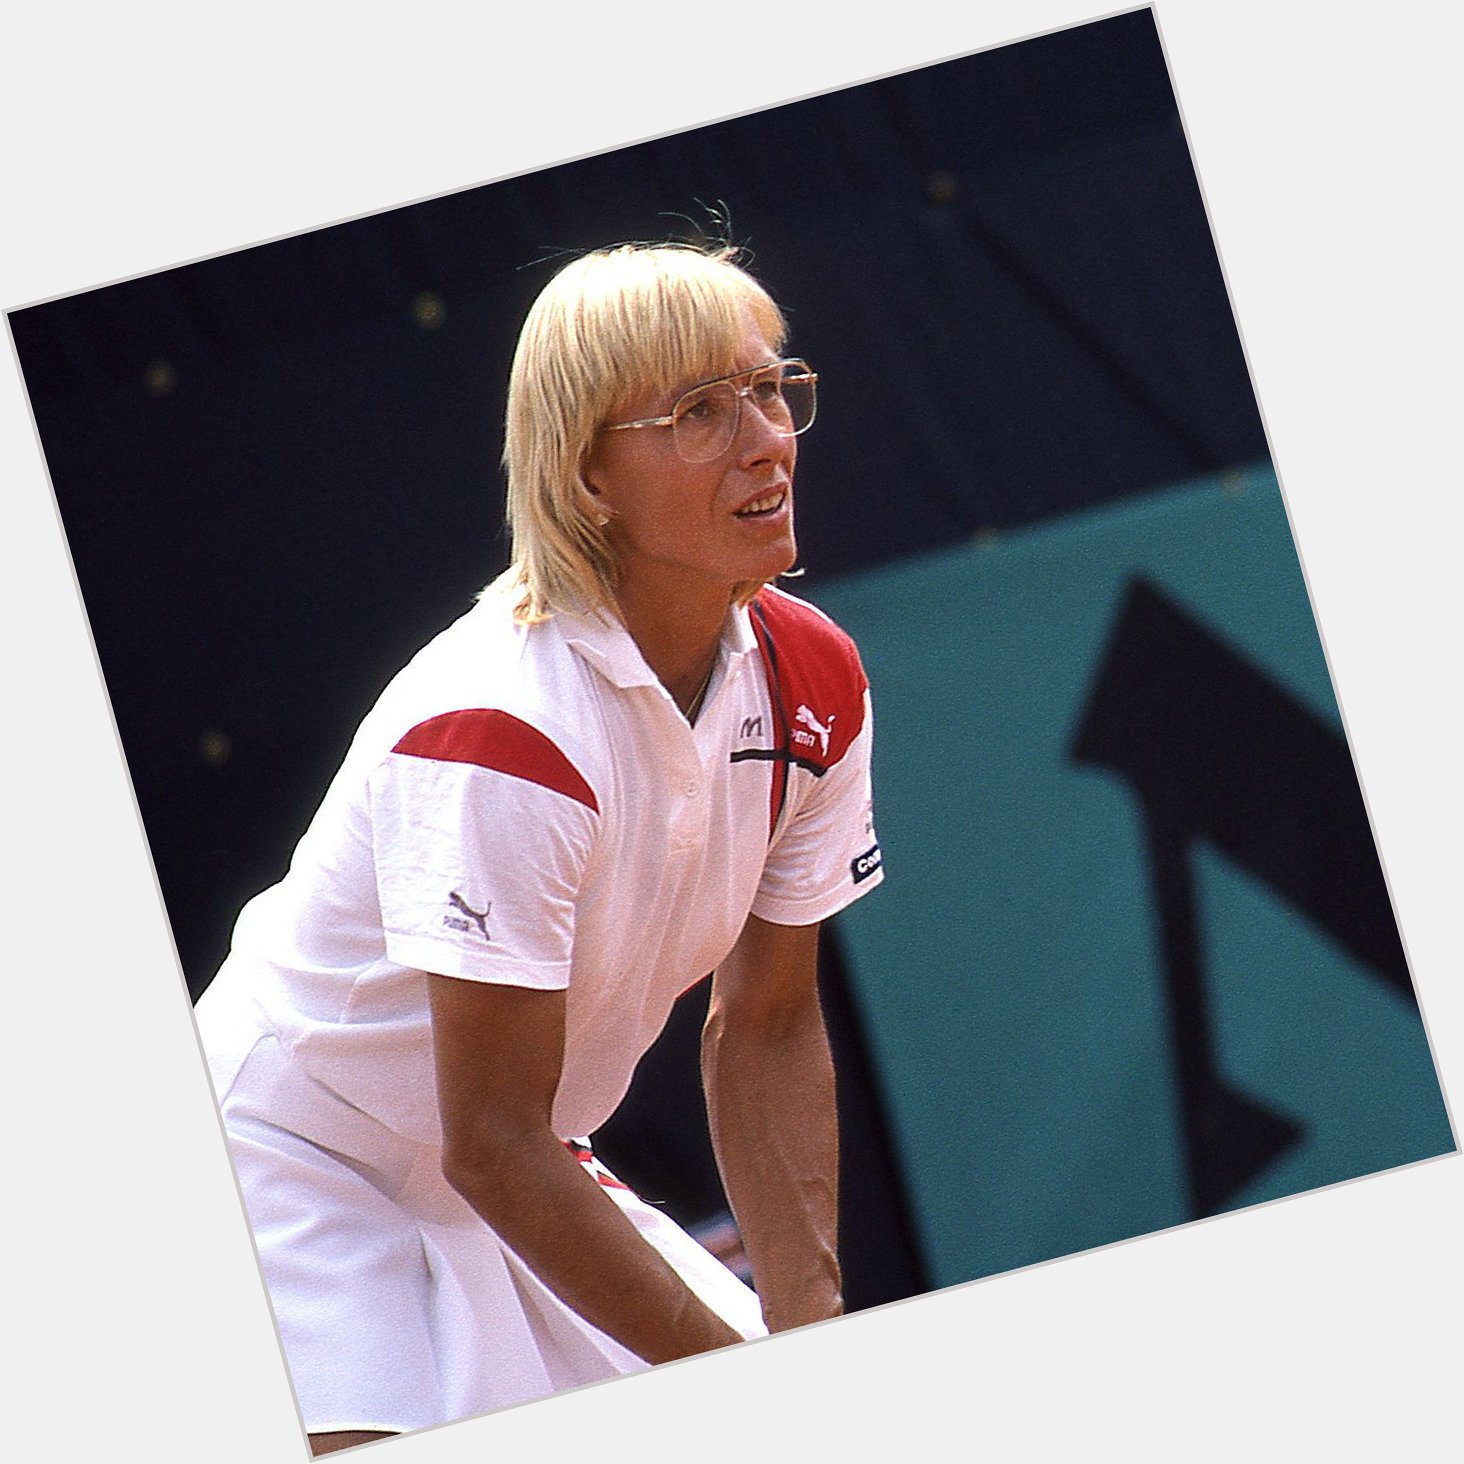 One of the greats of the game...

Many happy returns to Navratilova, who celebrates her birthday today  